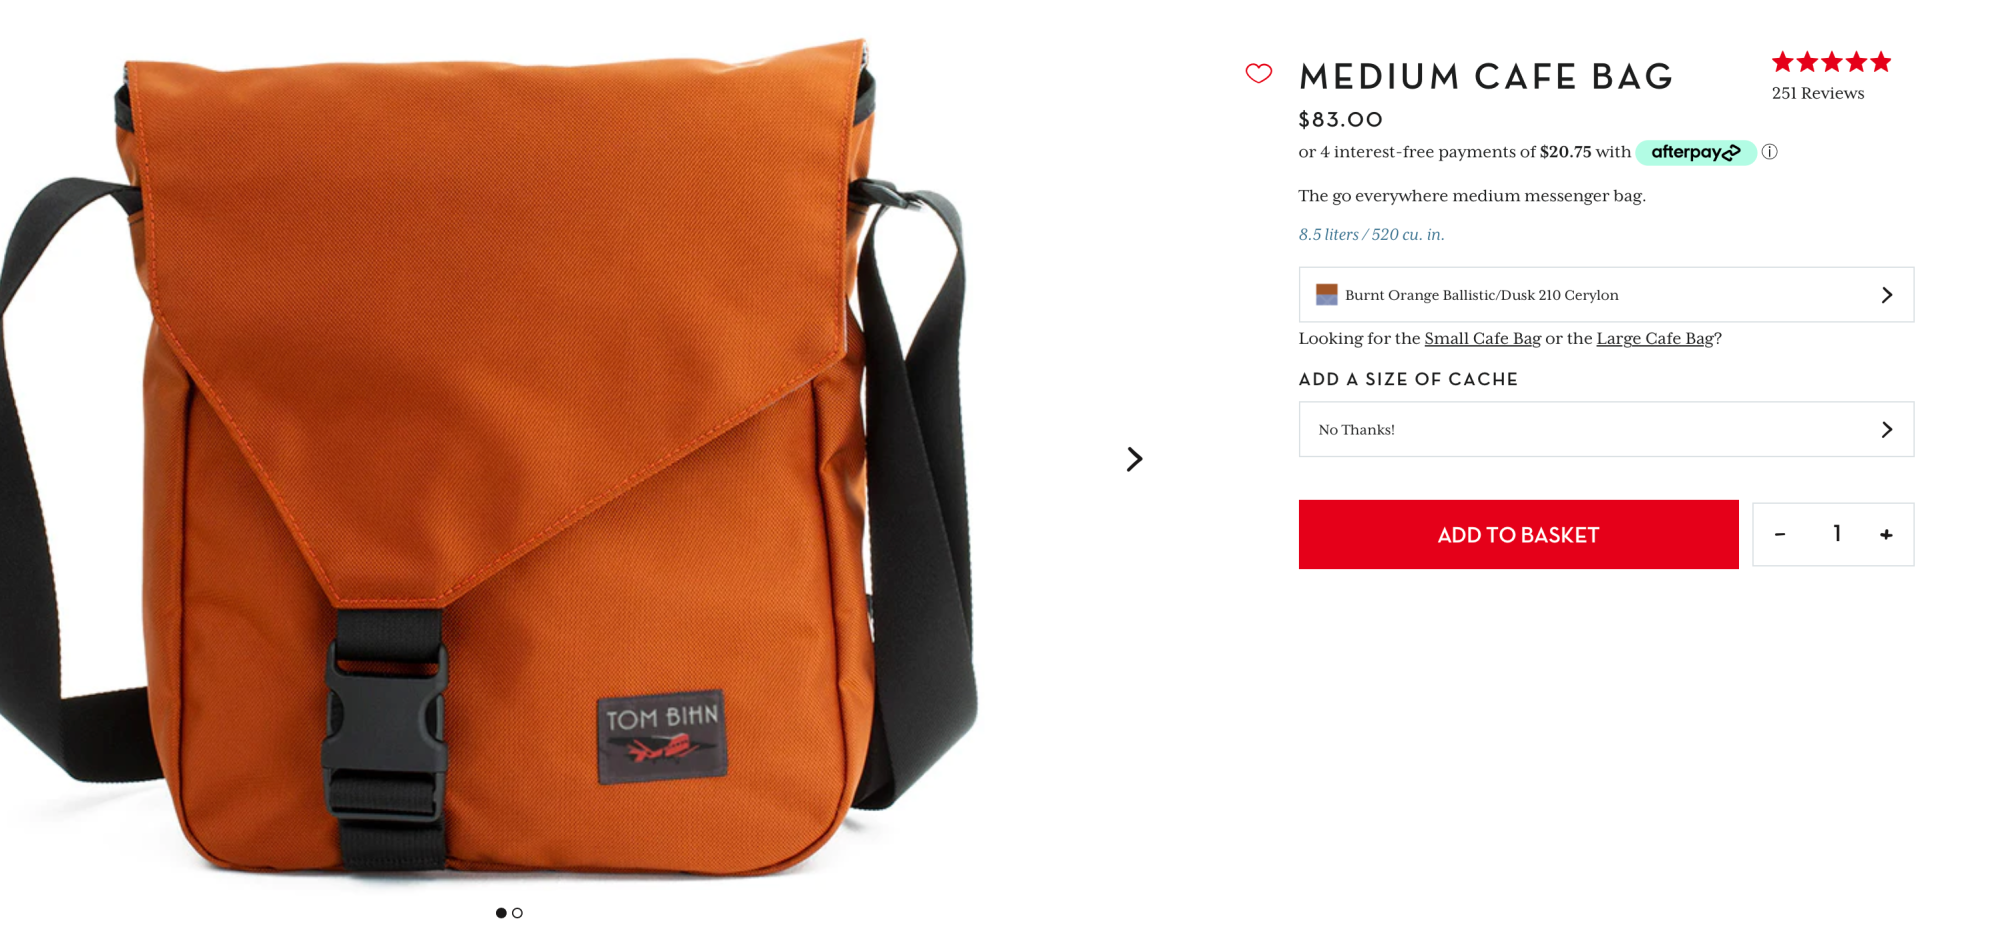 Timbuk2's XS Messenger Bag is compact and iPad-ready: $61.50 (Over 20% off)